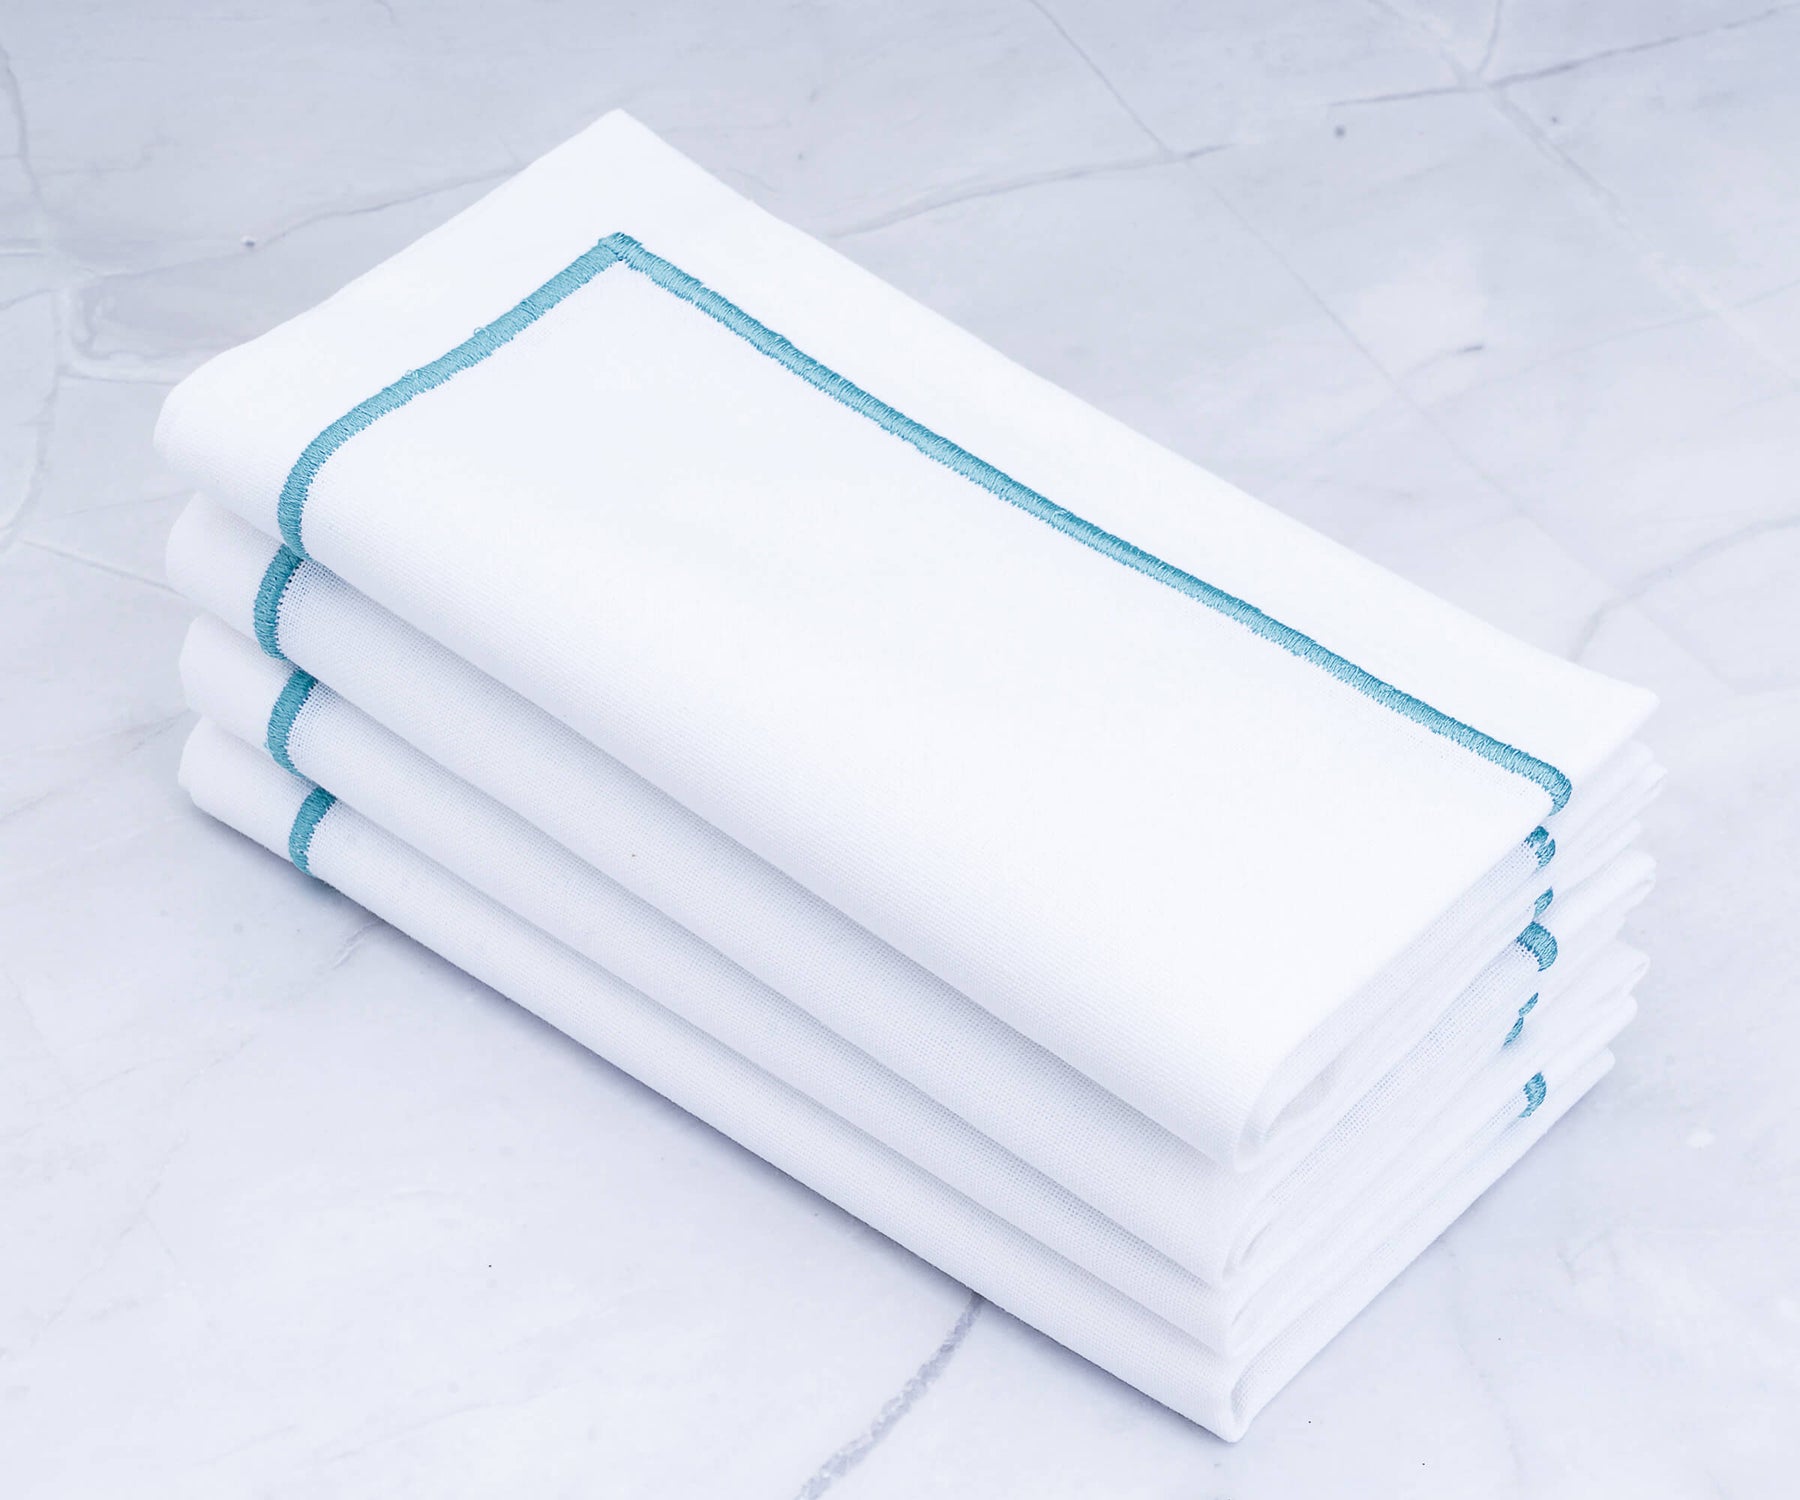 Set your table with soft blue napkins, adding a natural touch.